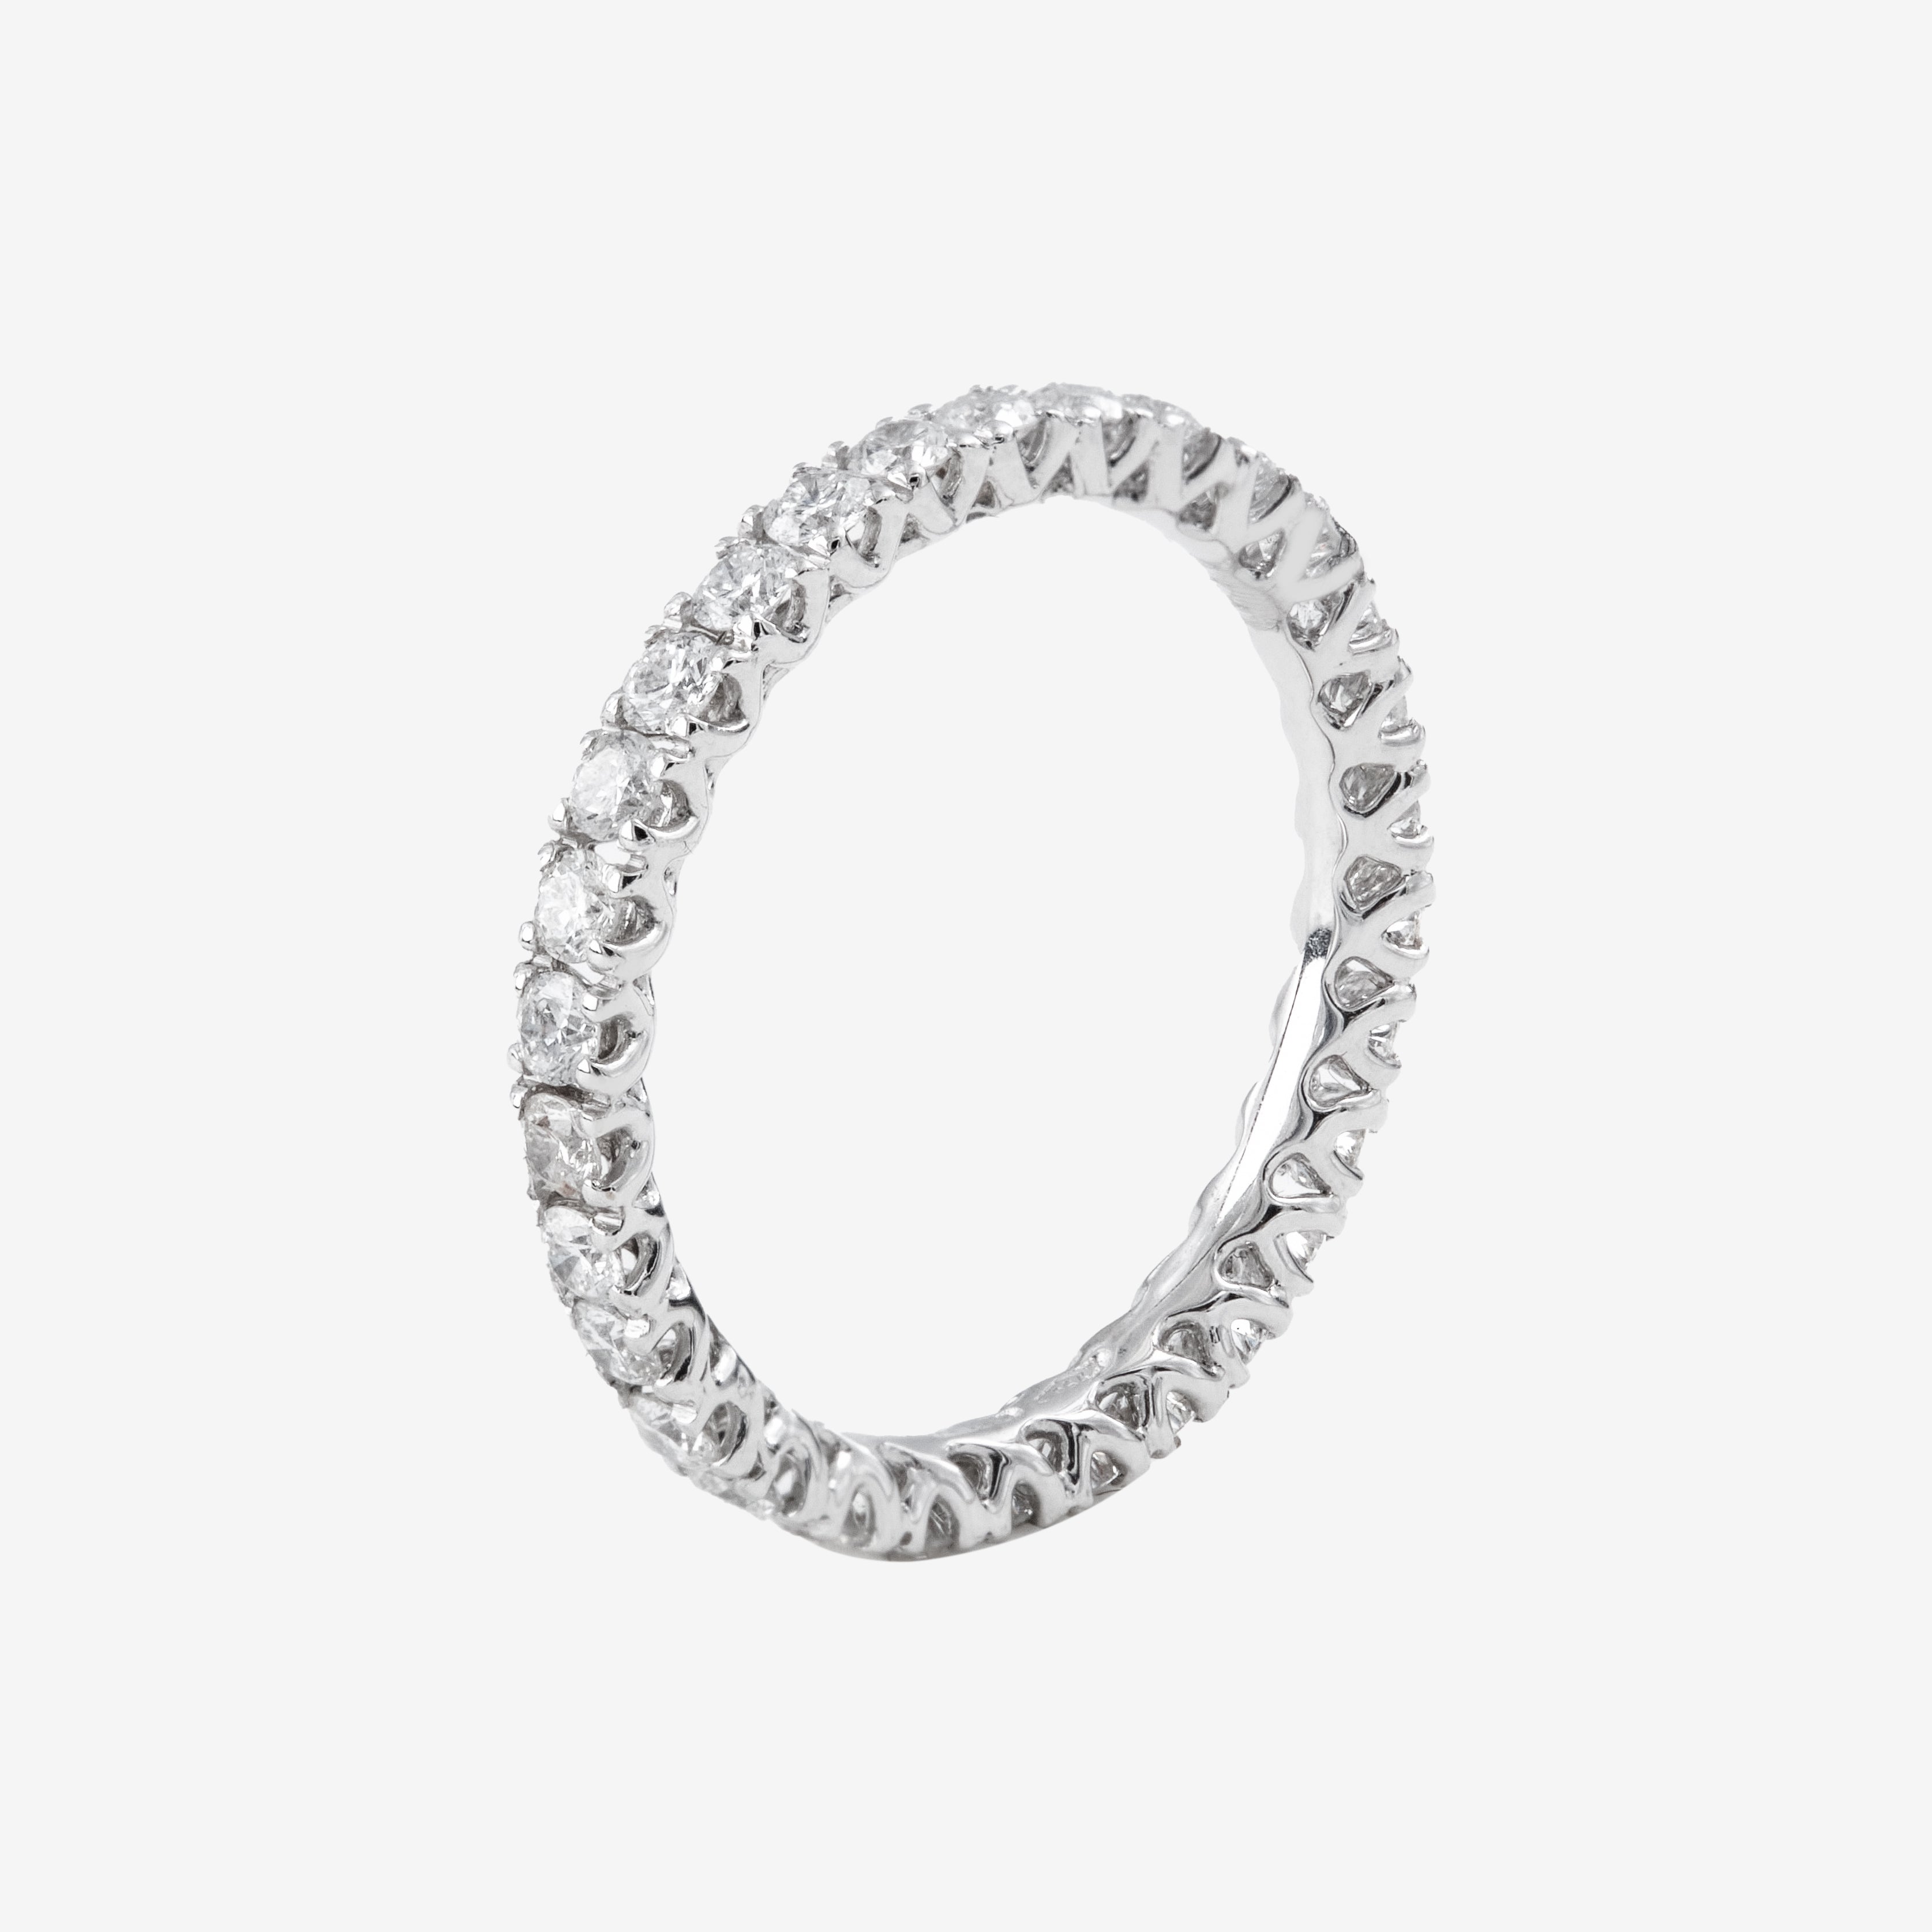 White Gold Eternity Ring with White Diamonds 0.25ct